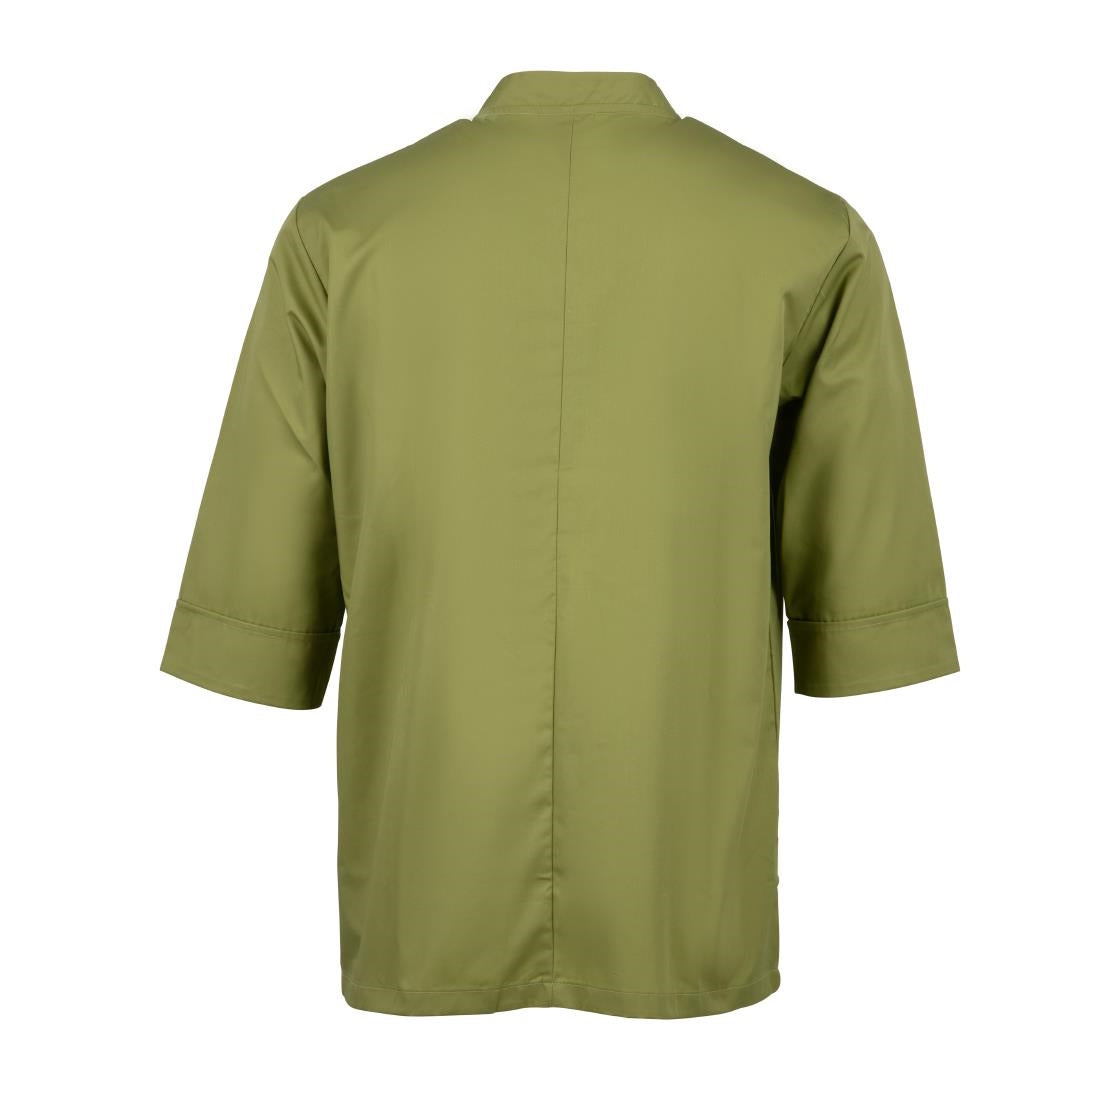 B107-L Chef Works Unisex Chefs Jacket Lime L JD Catering Equipment Solutions Ltd